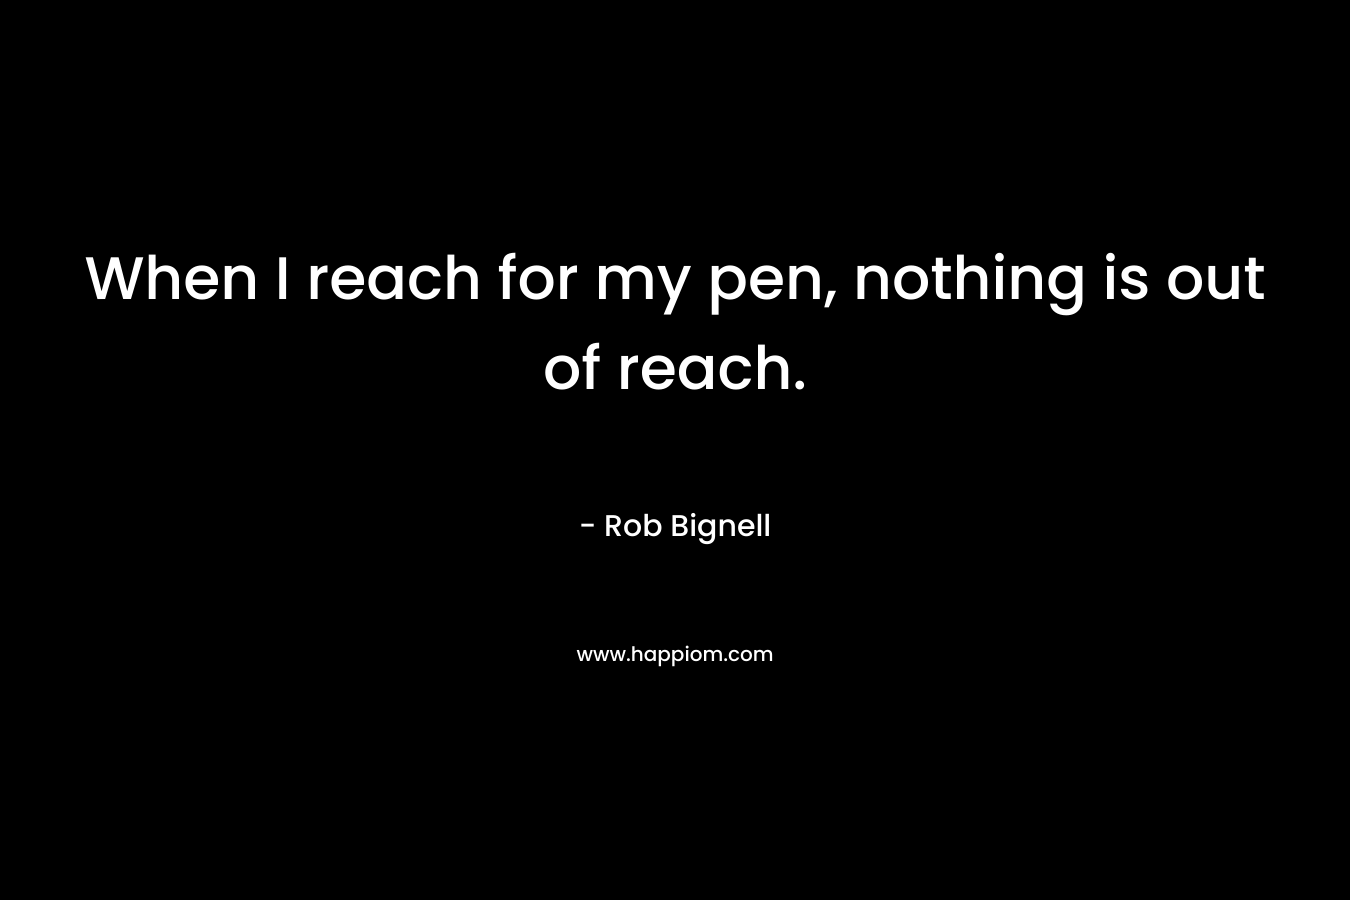 When I reach for my pen, nothing is out of reach.